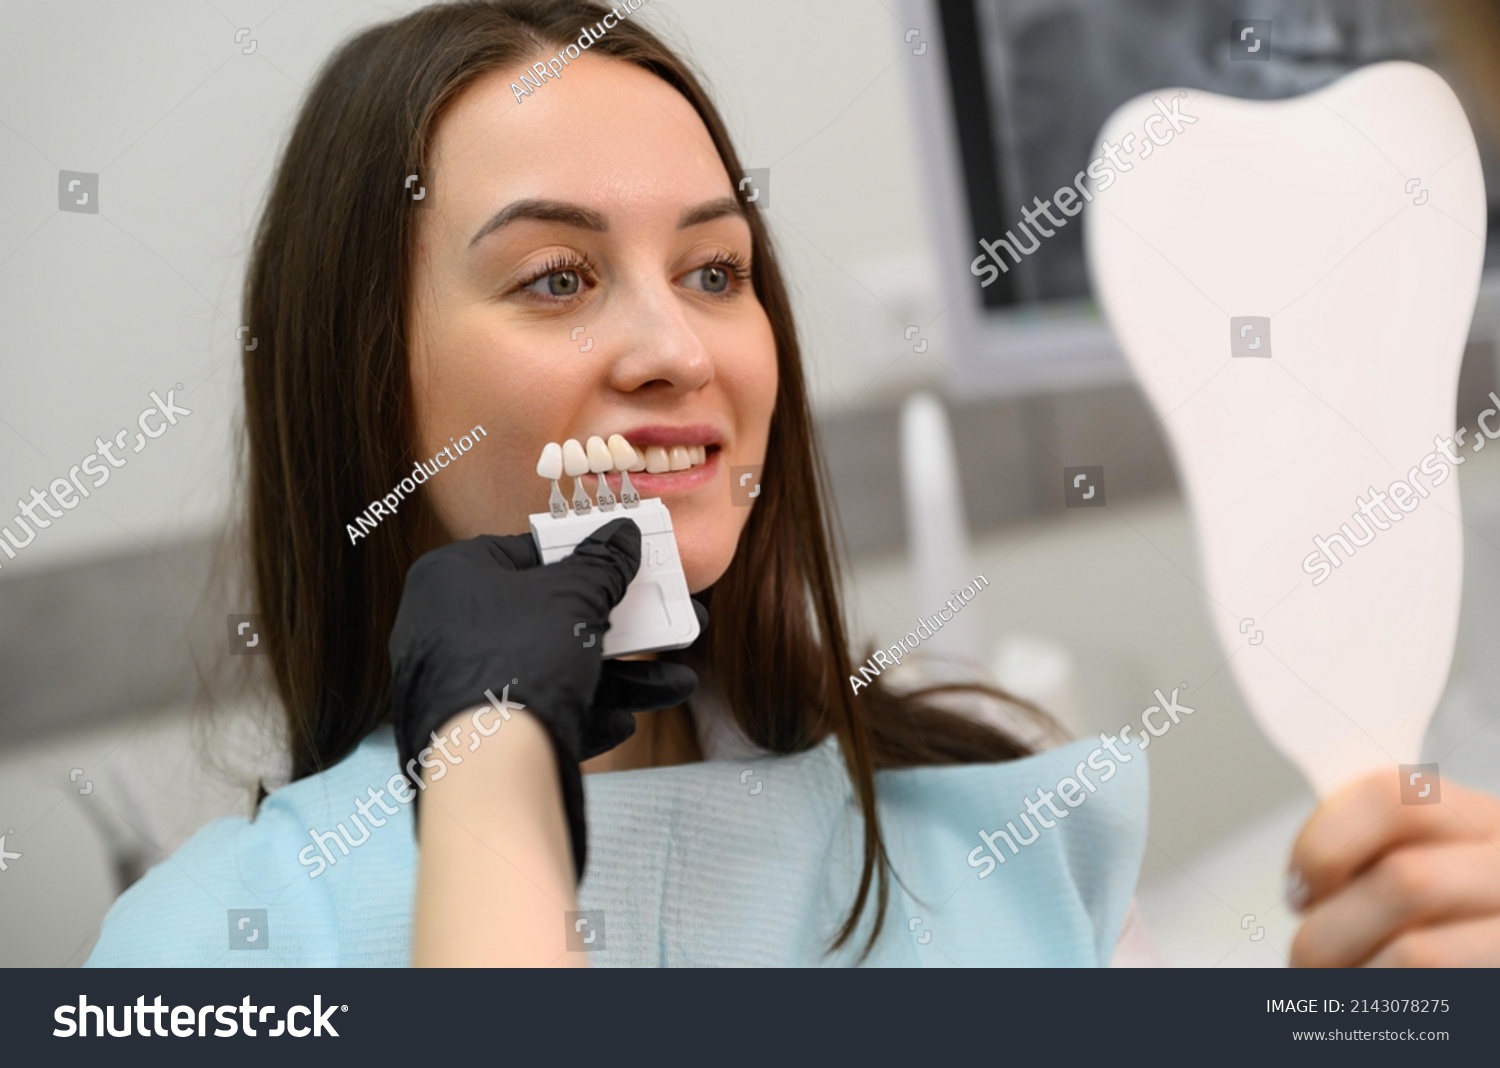 Stock Photo Dentist At Work In Dental Clinic Matching The Shades Of The Implants Using Shade Guide 2143078275 